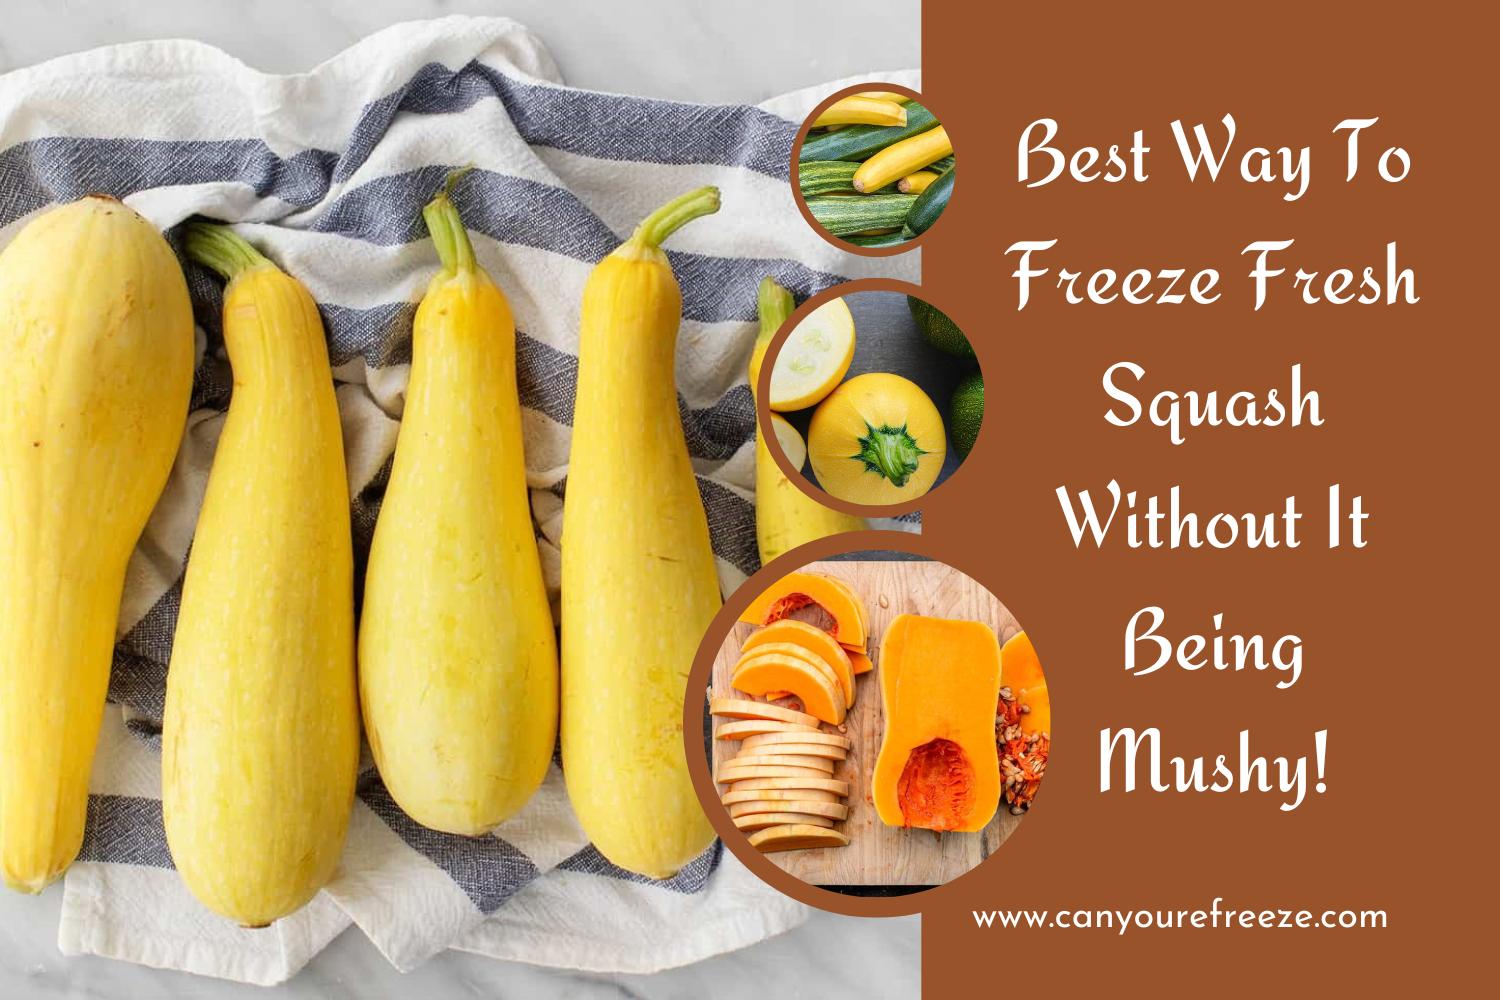 Best Way To Freeze Fresh Squash Without It Being Mushy!